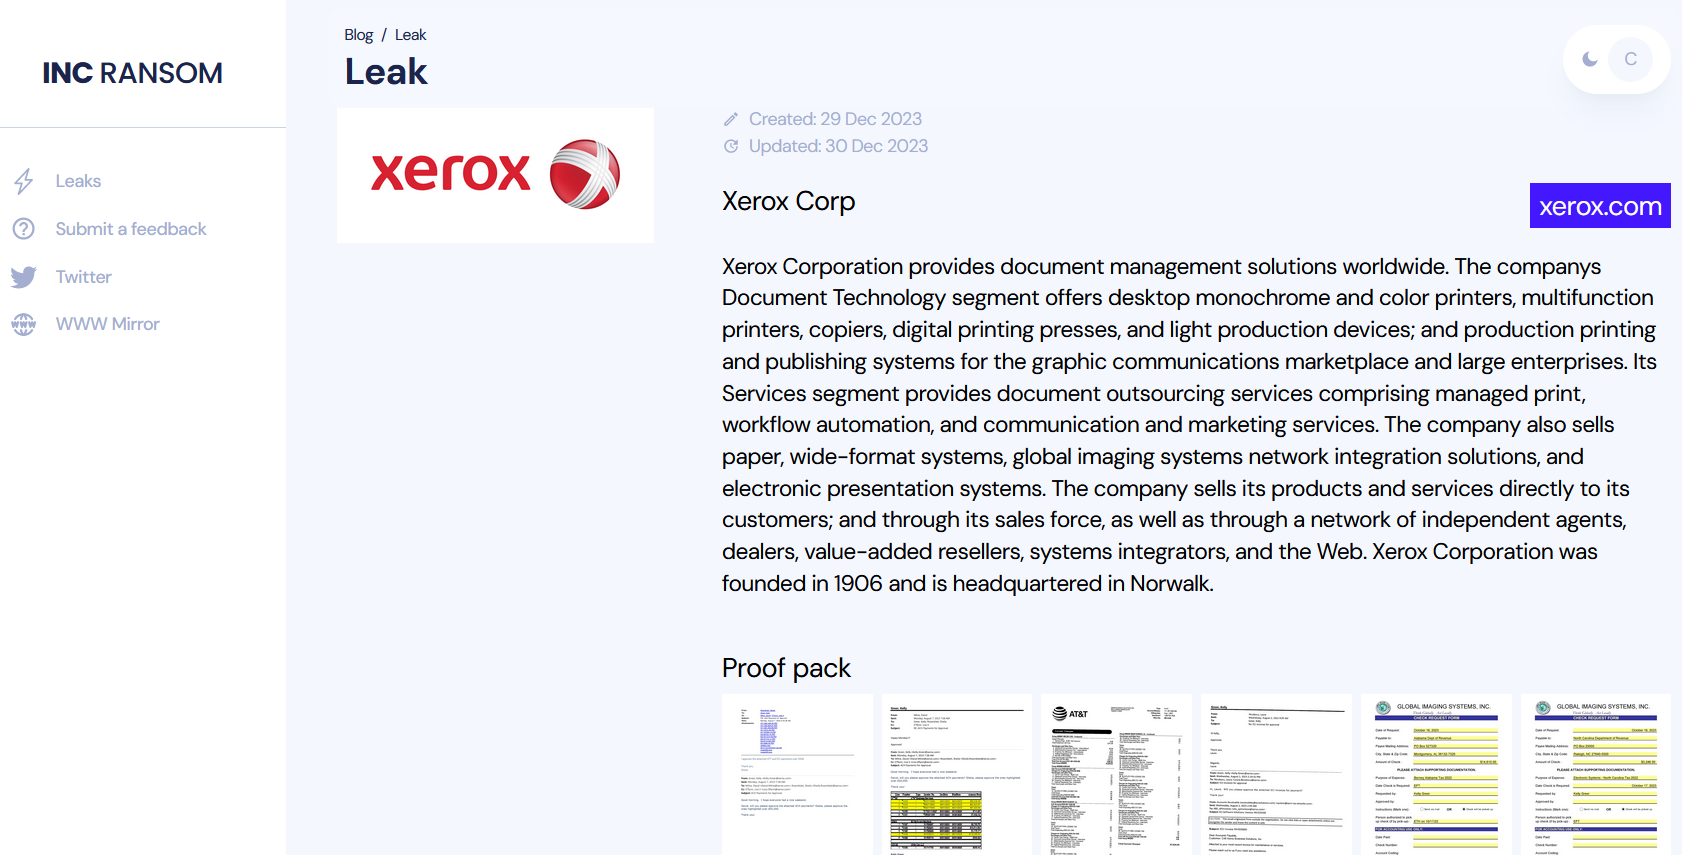 INC RANSOM ransomware gang claims to have breached Xerox Corp